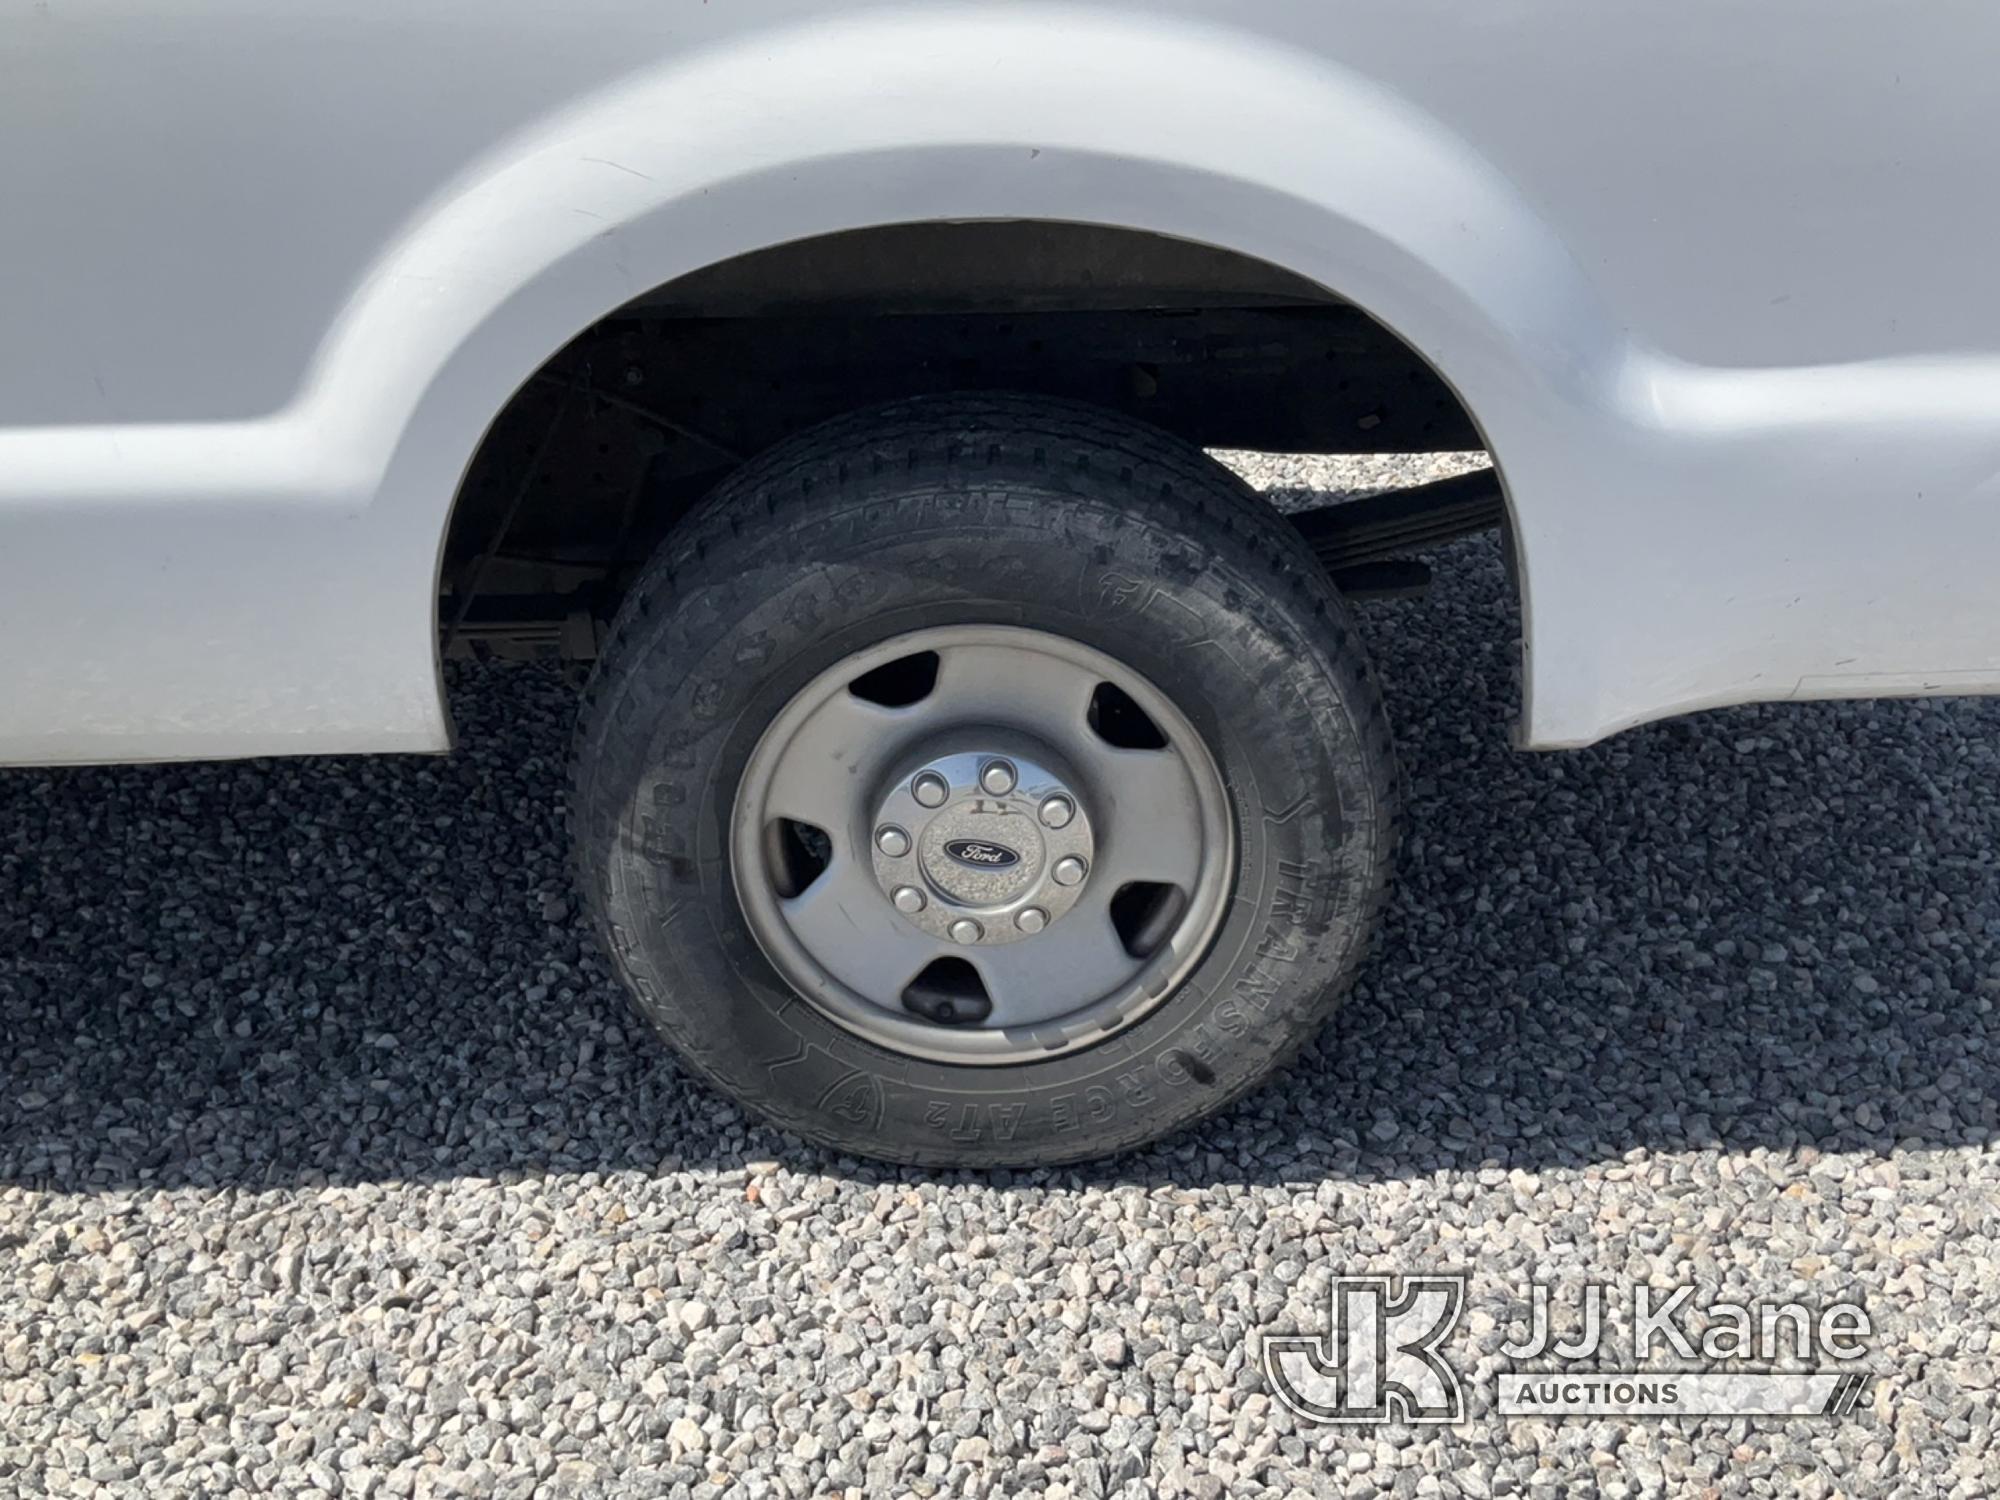 (Las Vegas, NV) 2006 Ford F250 Towed In, Body Damage Turns Over Will Not Start & Does Not Move